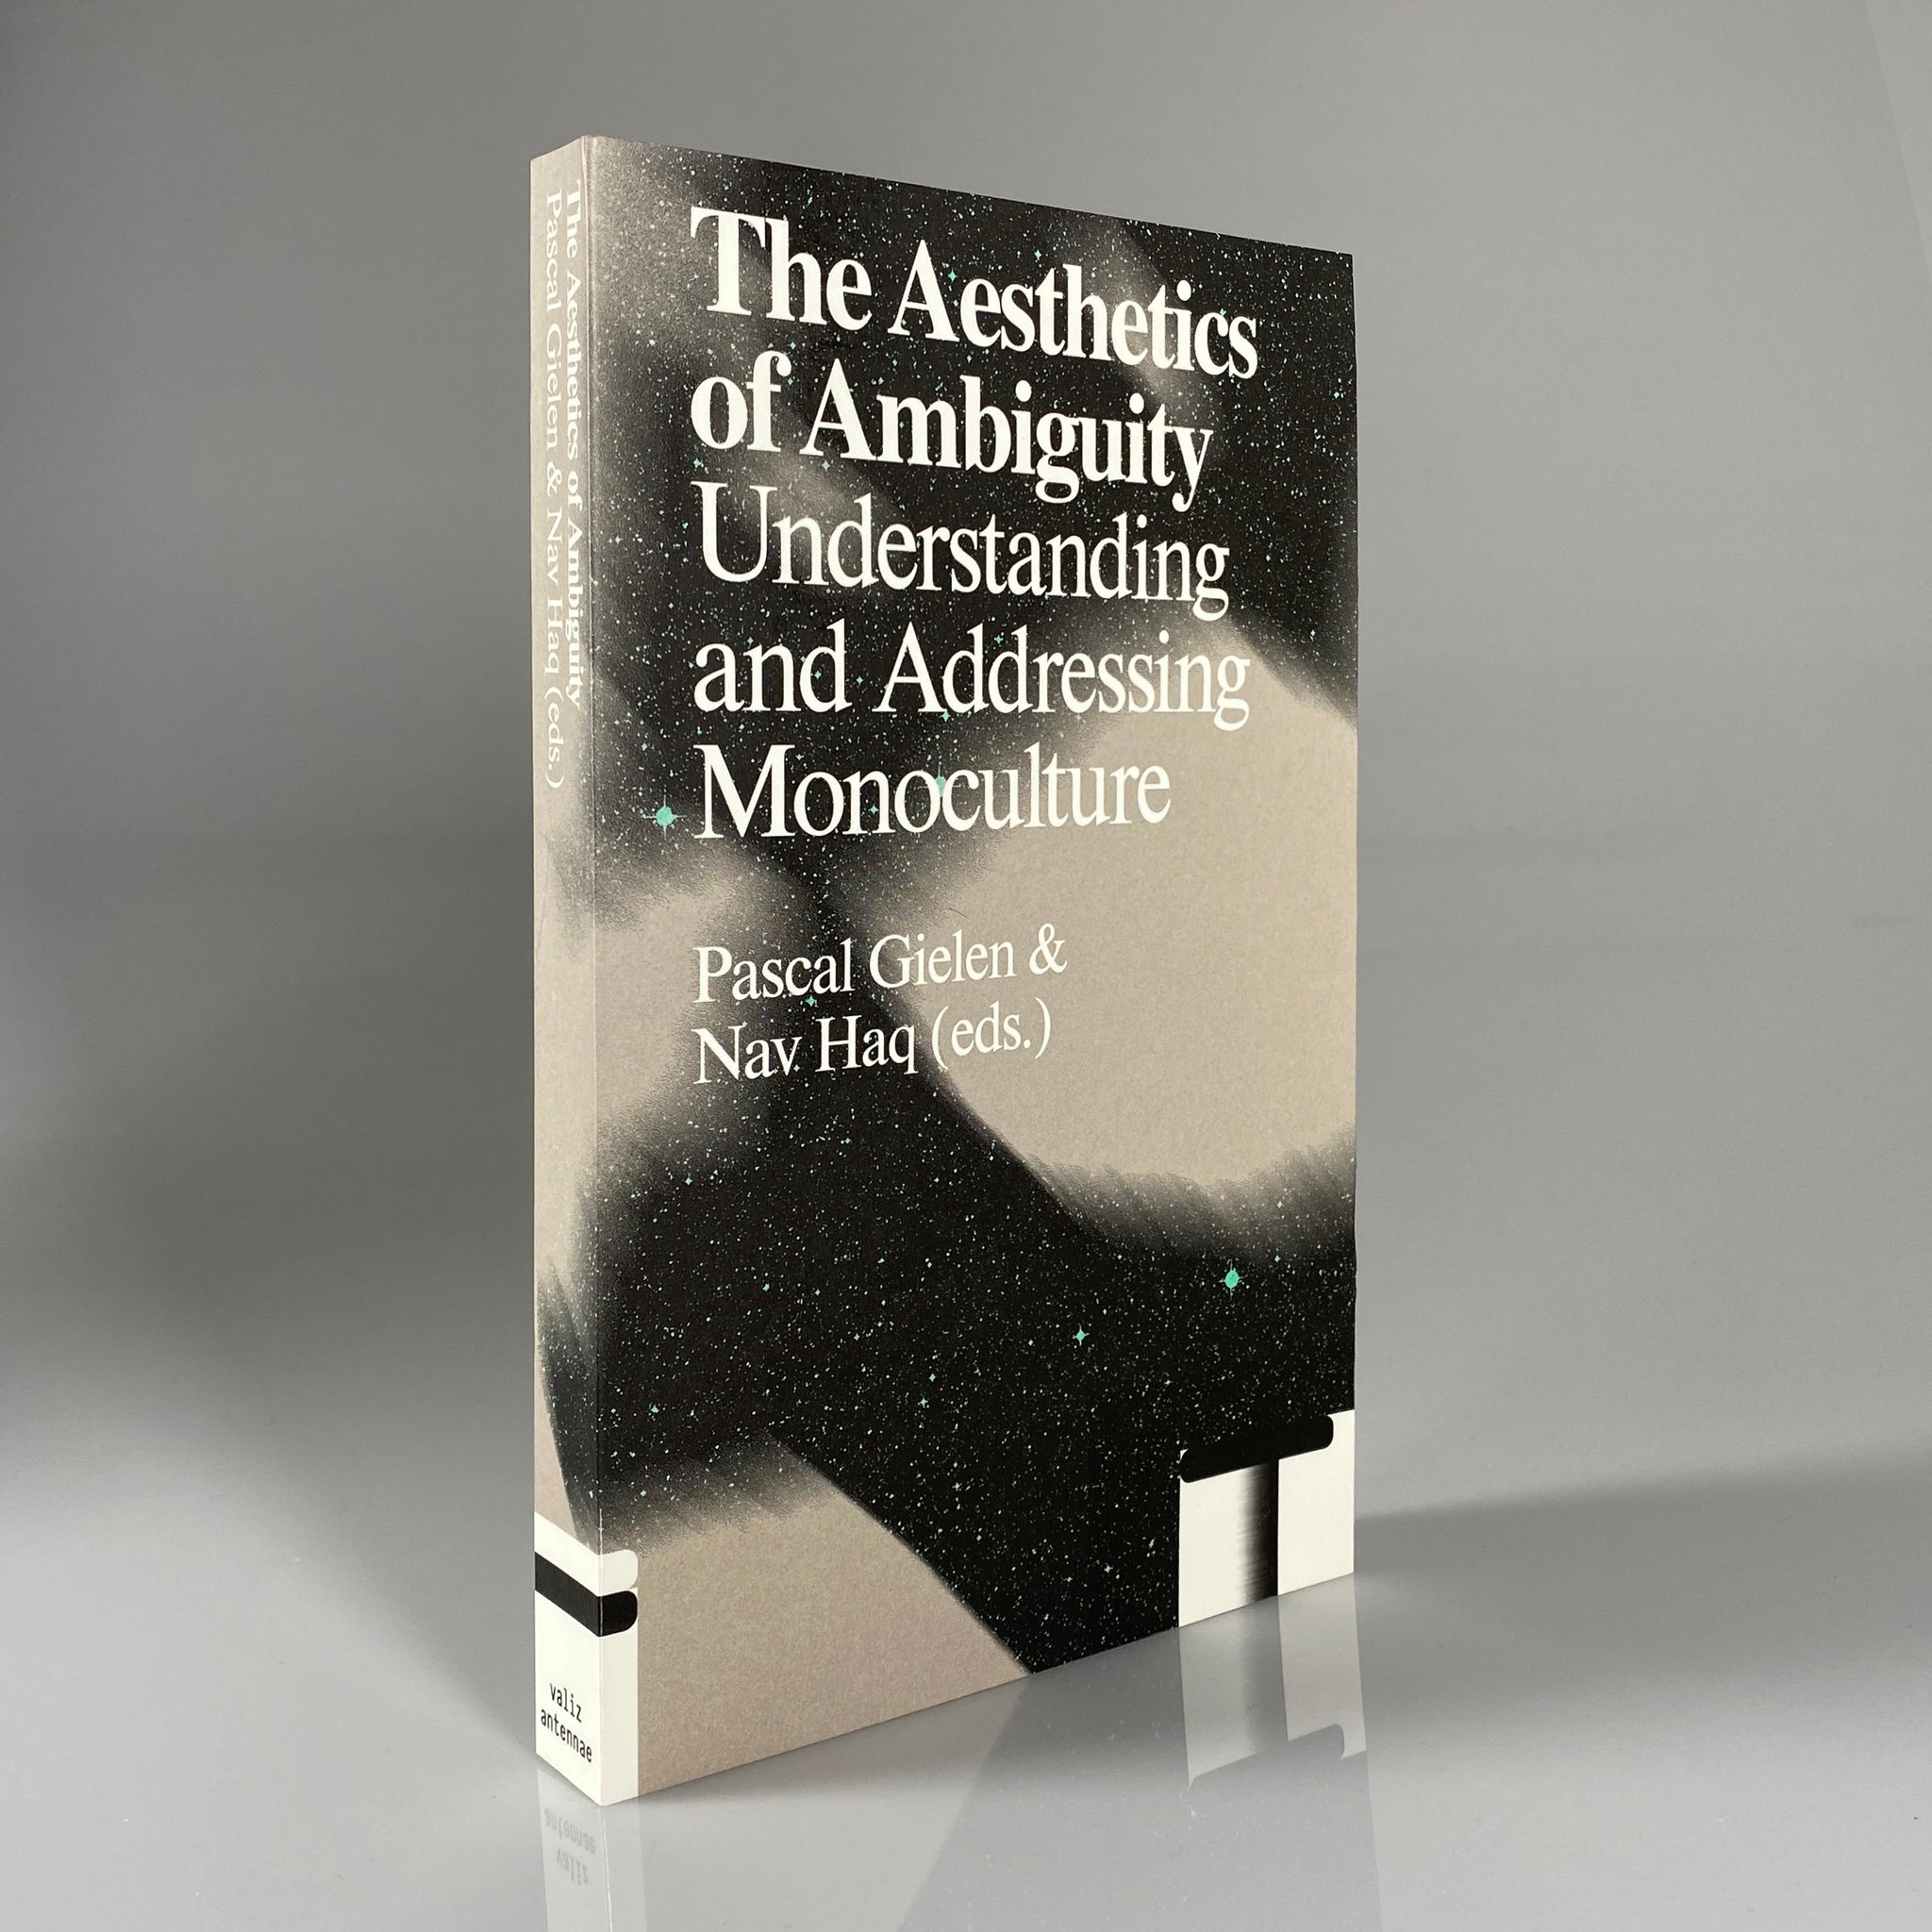 The Aesthetics of Ambiguity: Understanding and Addressing Monoculture